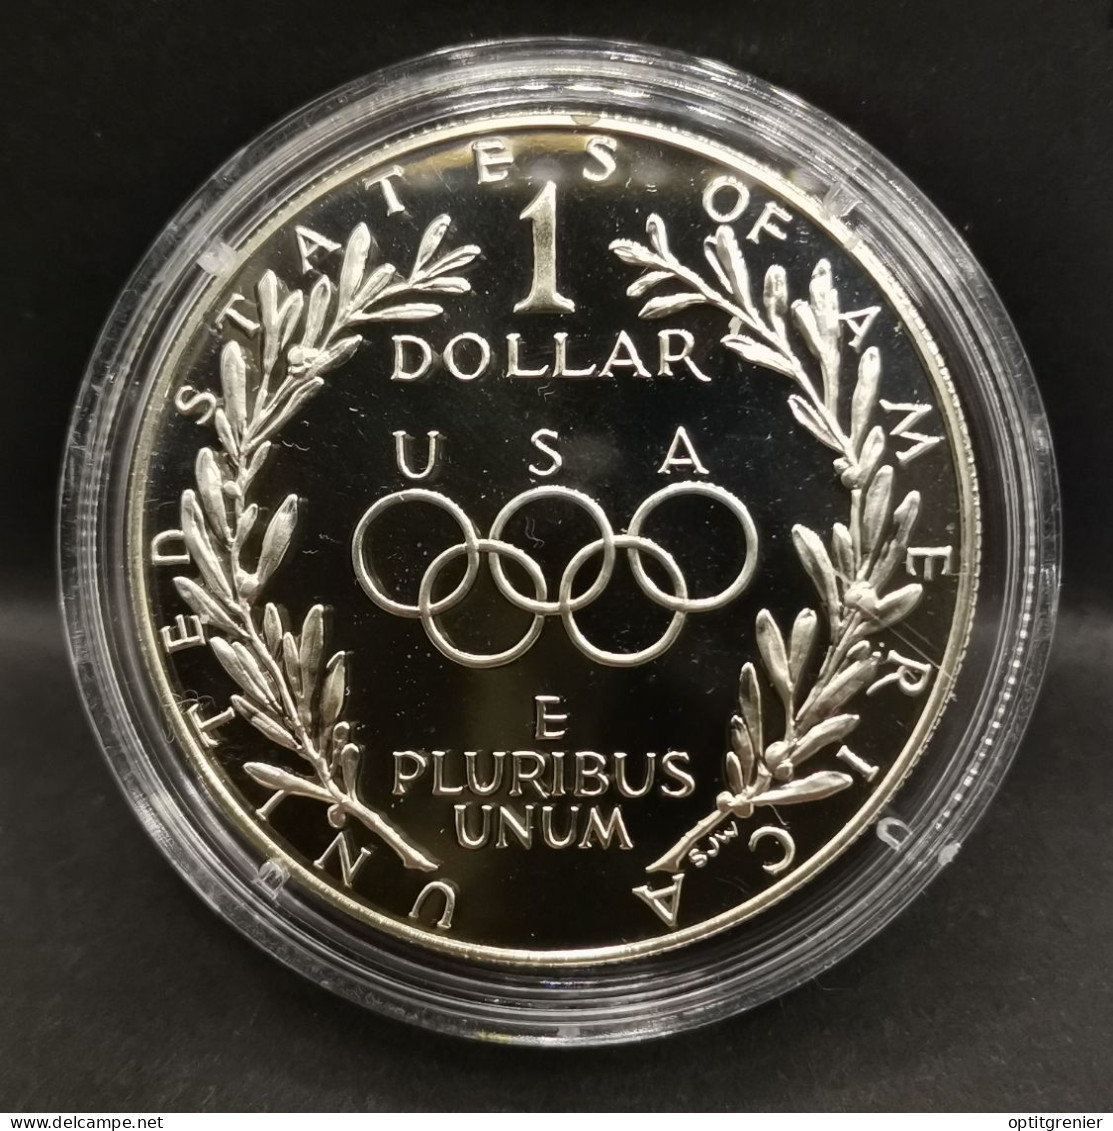 1 DOLLAR BE ARGENT 1988 S OLYMPIADES JO USA / PROOF SILVER - Non Classés